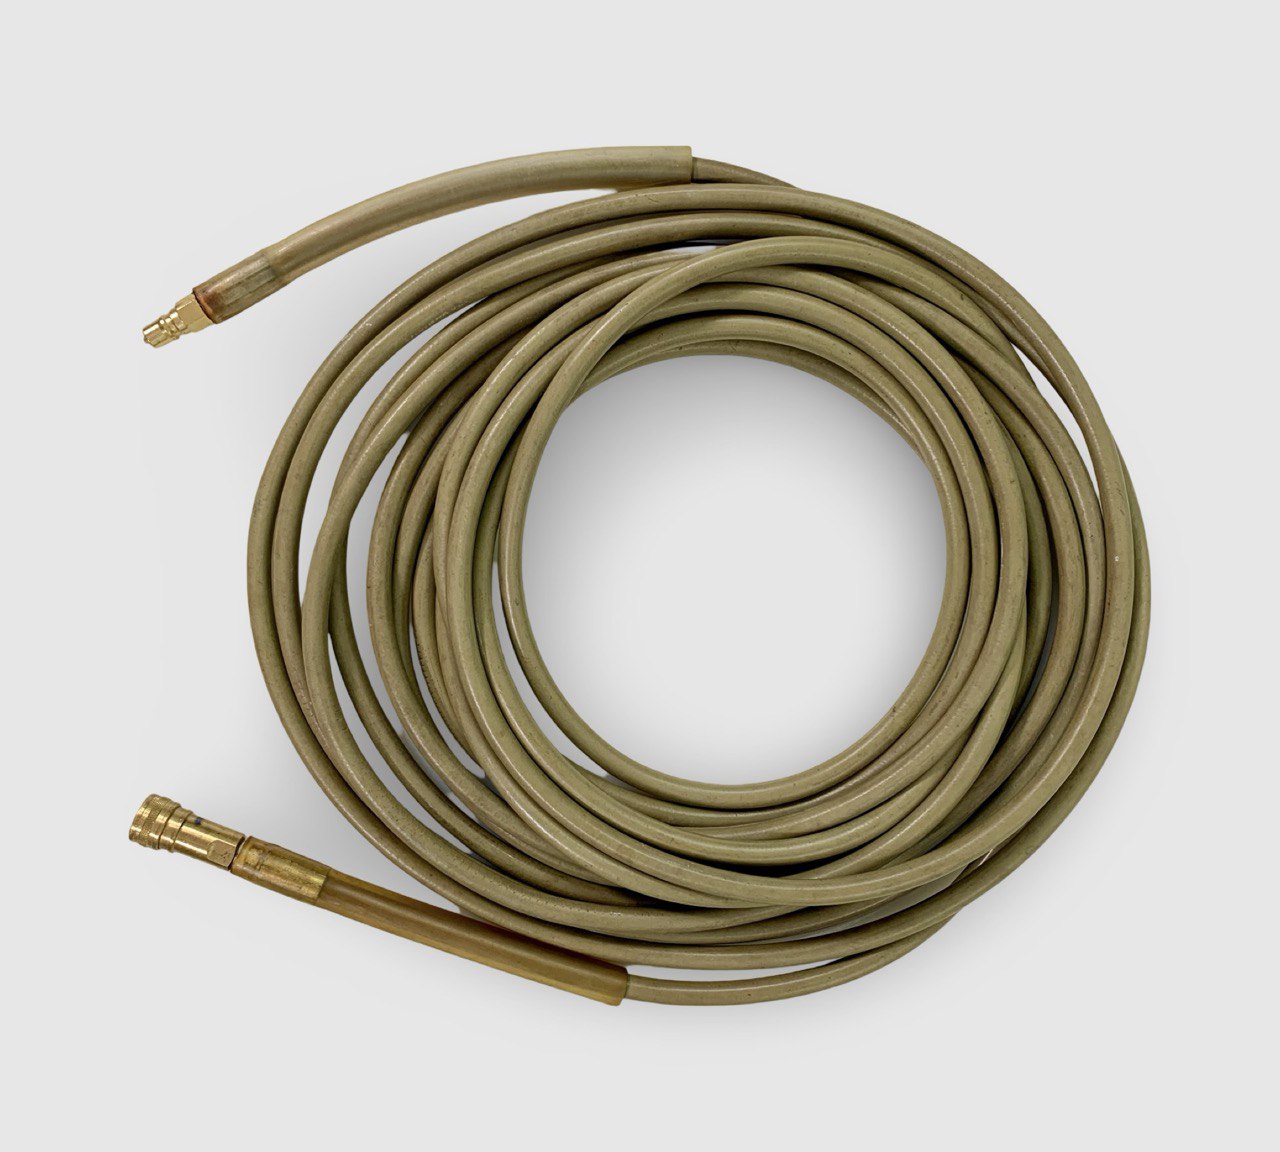 PRE-OWNED 47.5ft High Pressure Solution Hose ONLY - fitted with Standard Male & Female Brass Connector